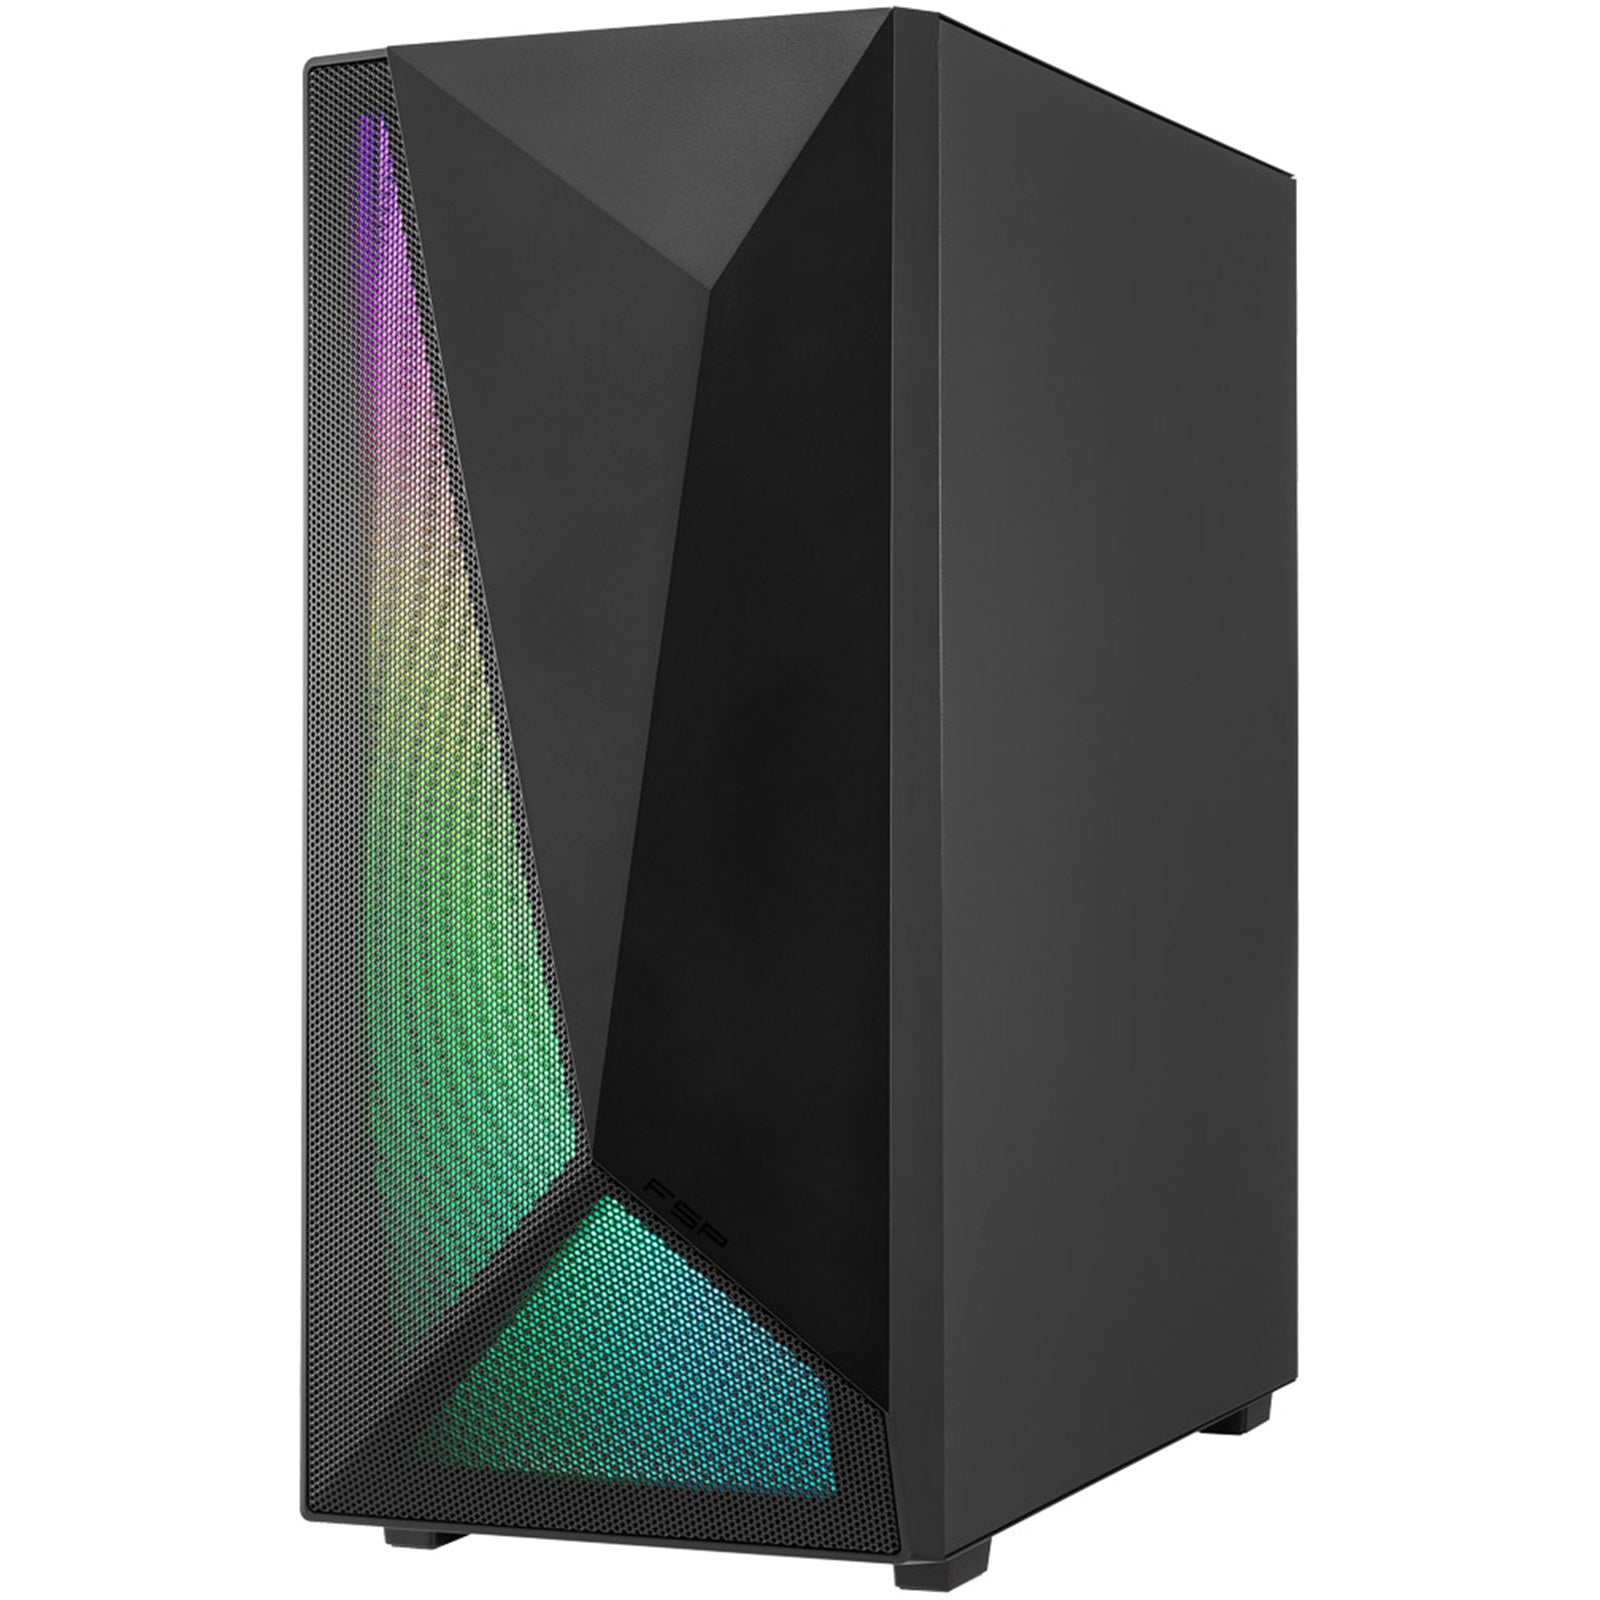 Refurbished Gaming PC, i7-10700k, RTX 3070, 32GB, 1TB SSD, Windows 11 - Refurbished Excellent Condition